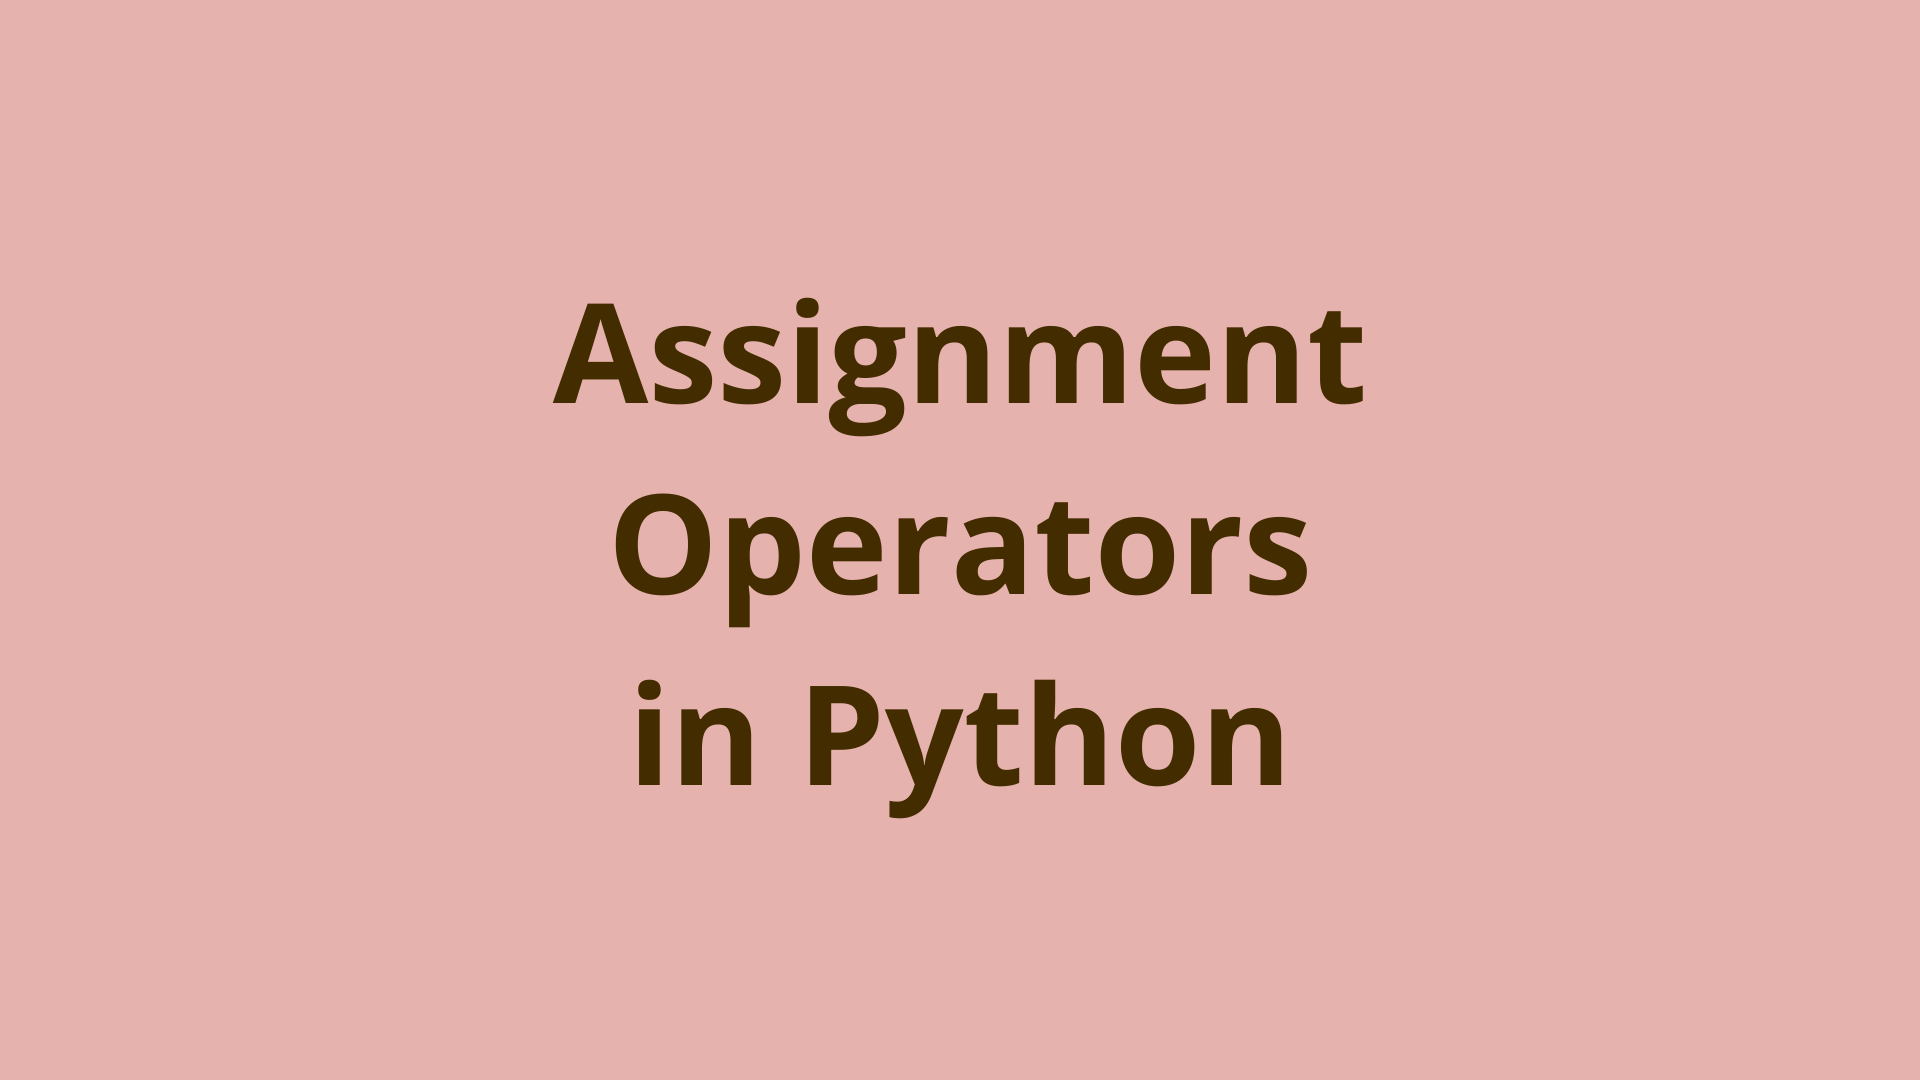 Image of Assignment Operators in Python